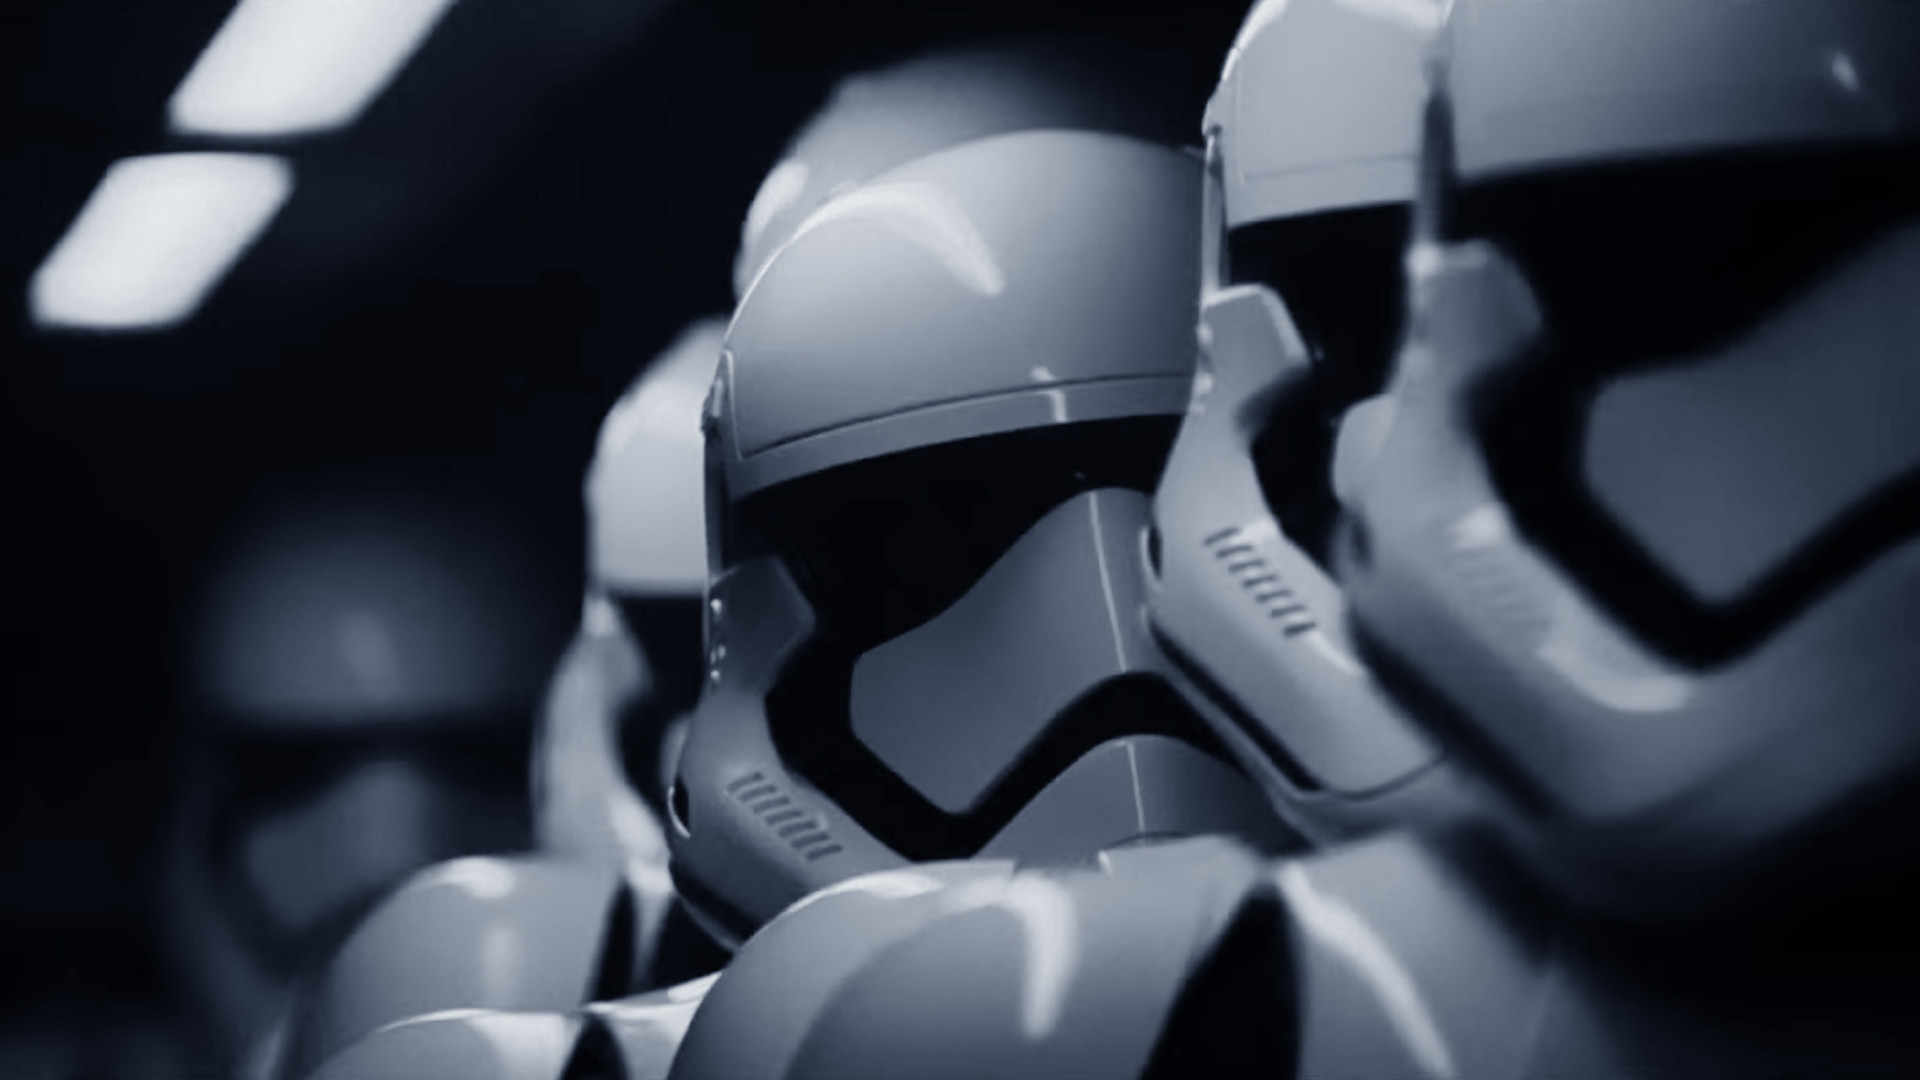 Noticed the background for some of Hot Toys new 501st Clone Trooper photos  uses BF2 maps  rStarWarsBattlefront